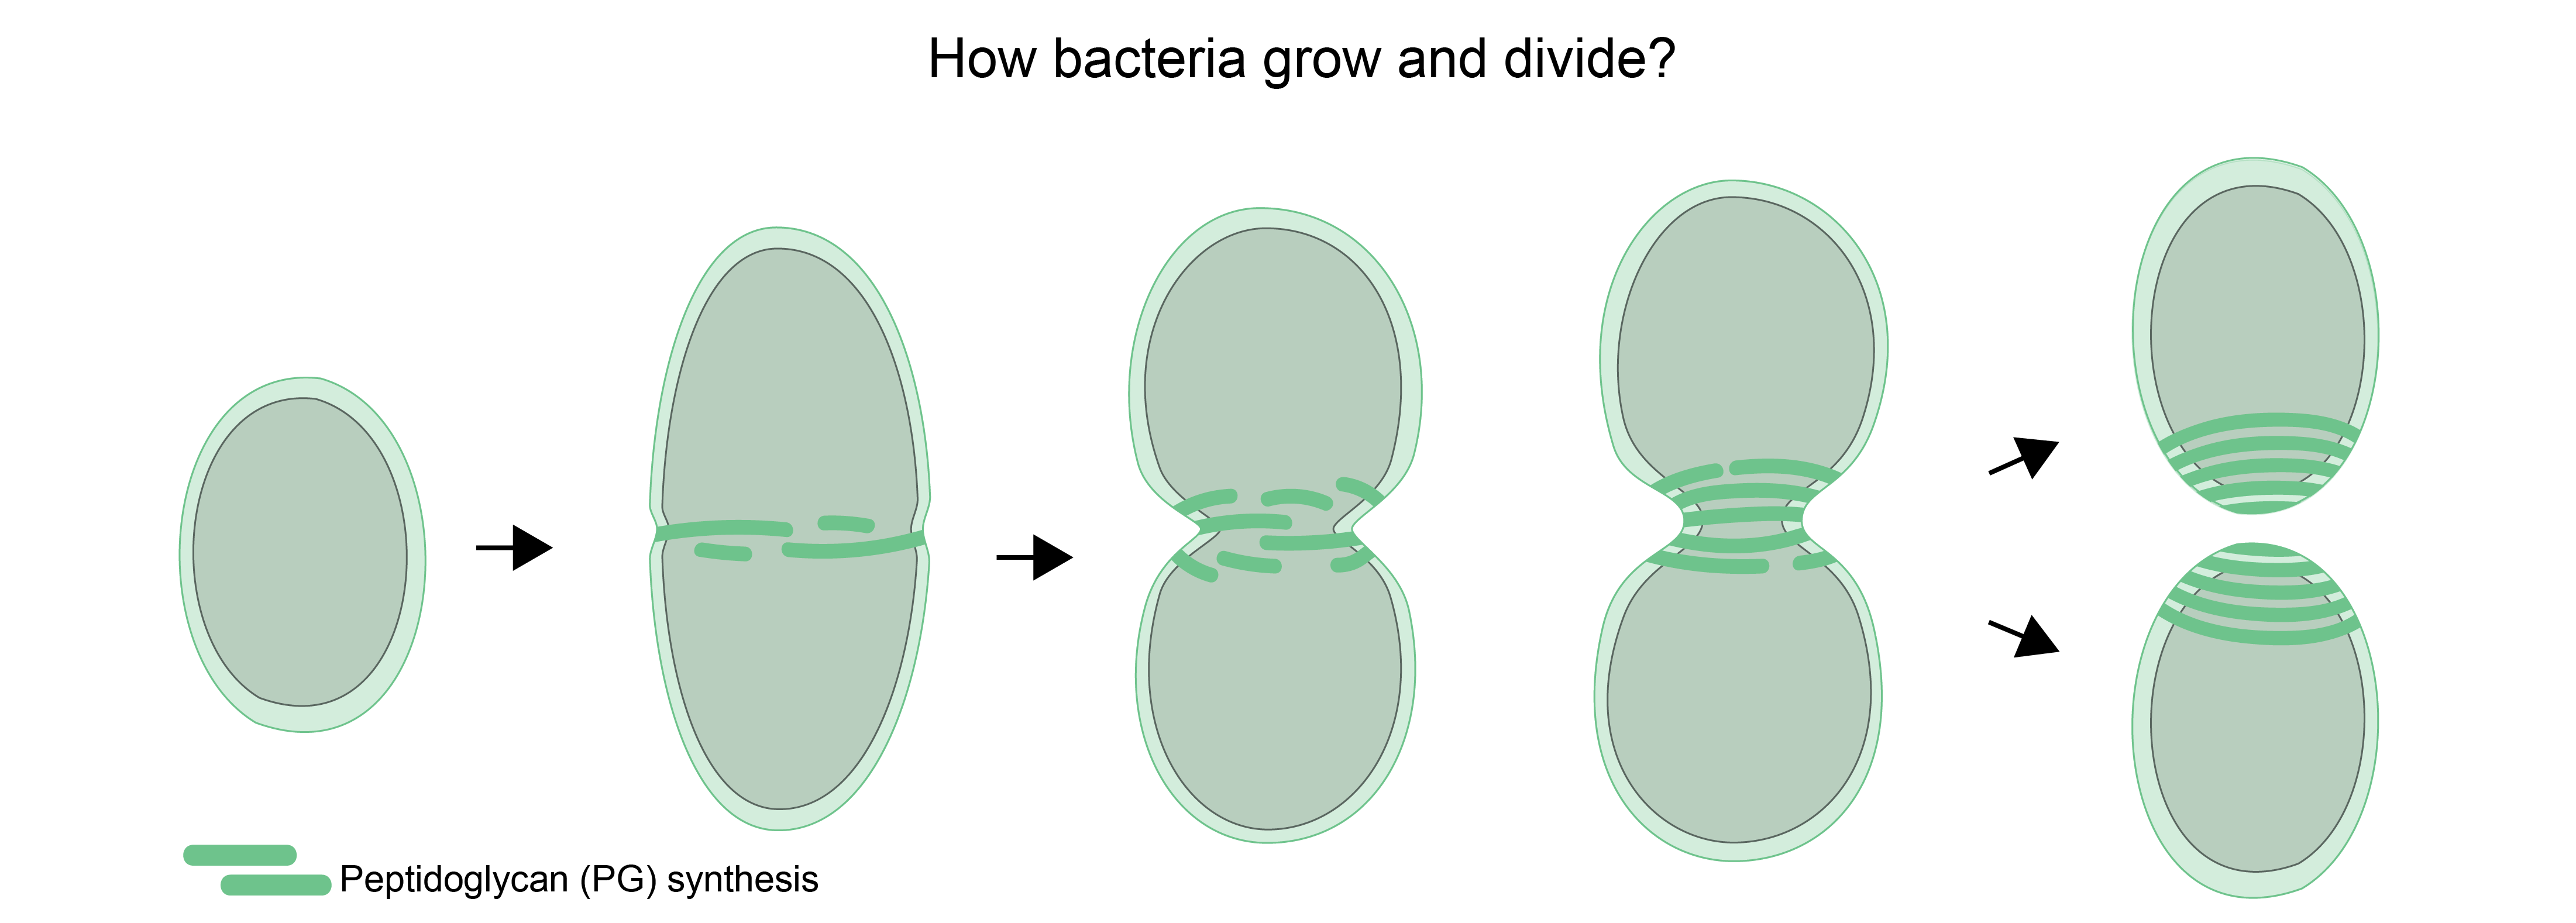 Schematic representation of the growth and division process of a pneumococcus bacteria 